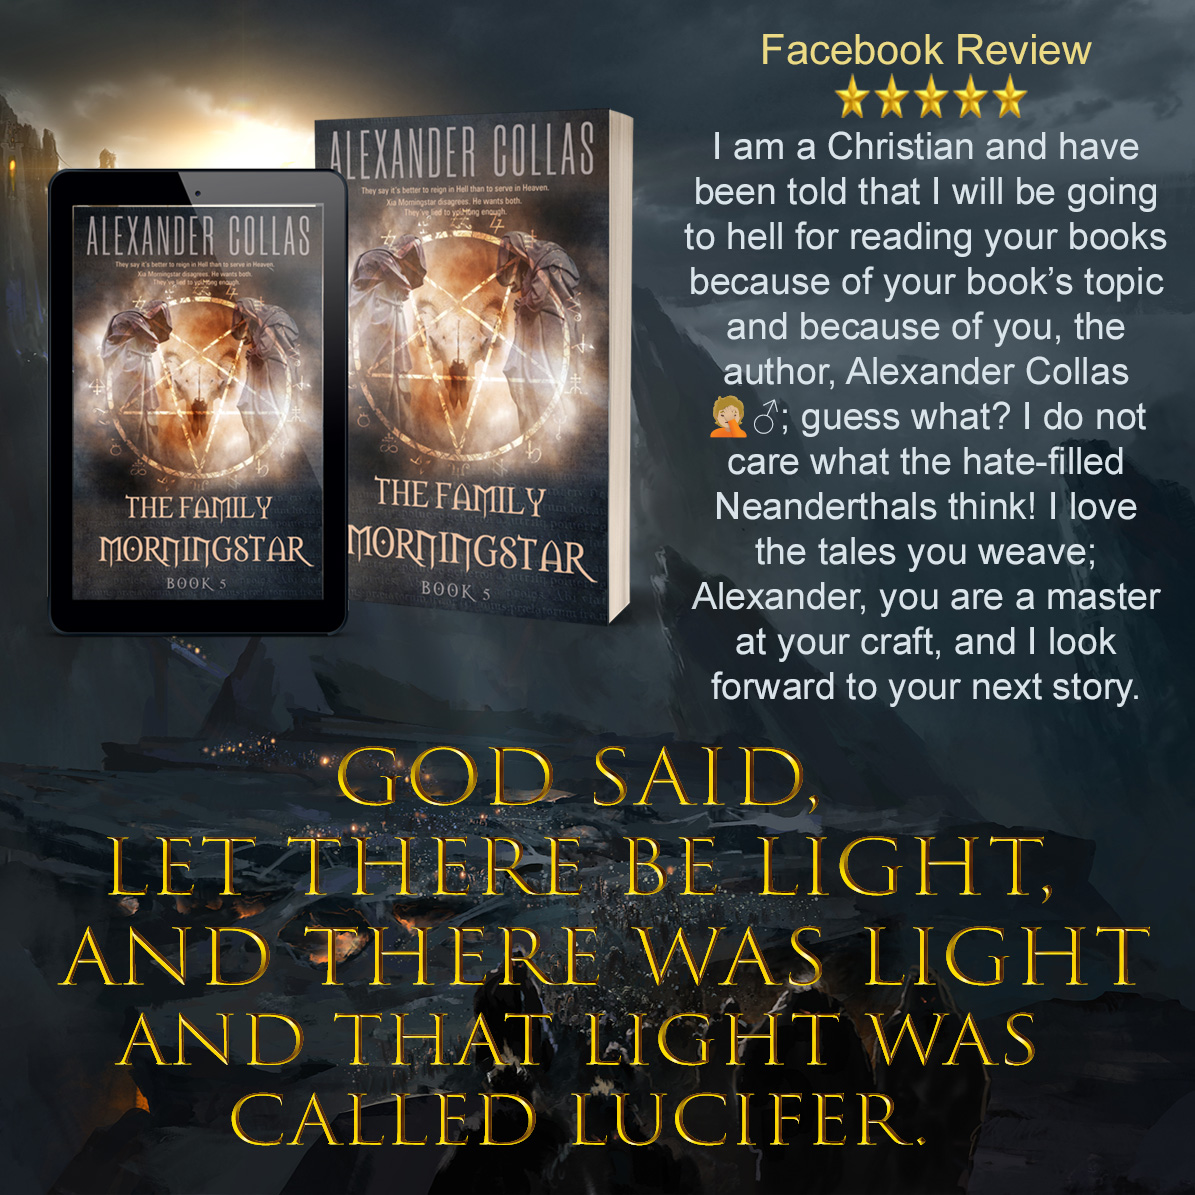 I love this review and thank you to all the readers who take the time to leave reviews. They mean a lot.  #ShamelessSelfpromoWednesday #booklovers #WritingCommunity #SATANIC #readerscommunity